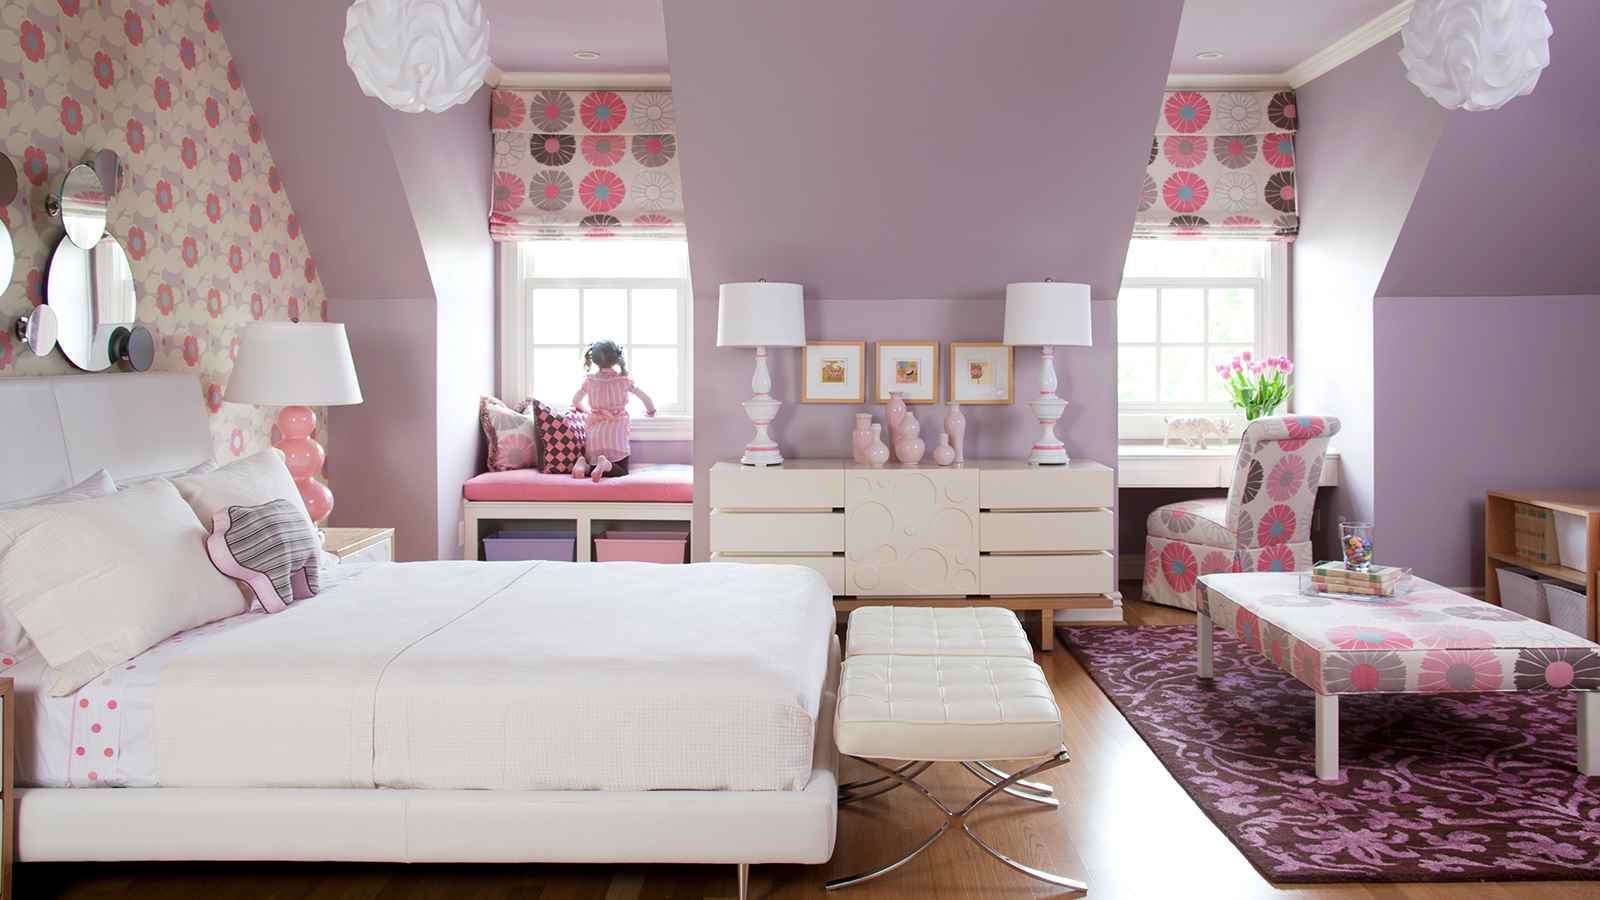 An example of a beautiful decor for a child’s room for a girl